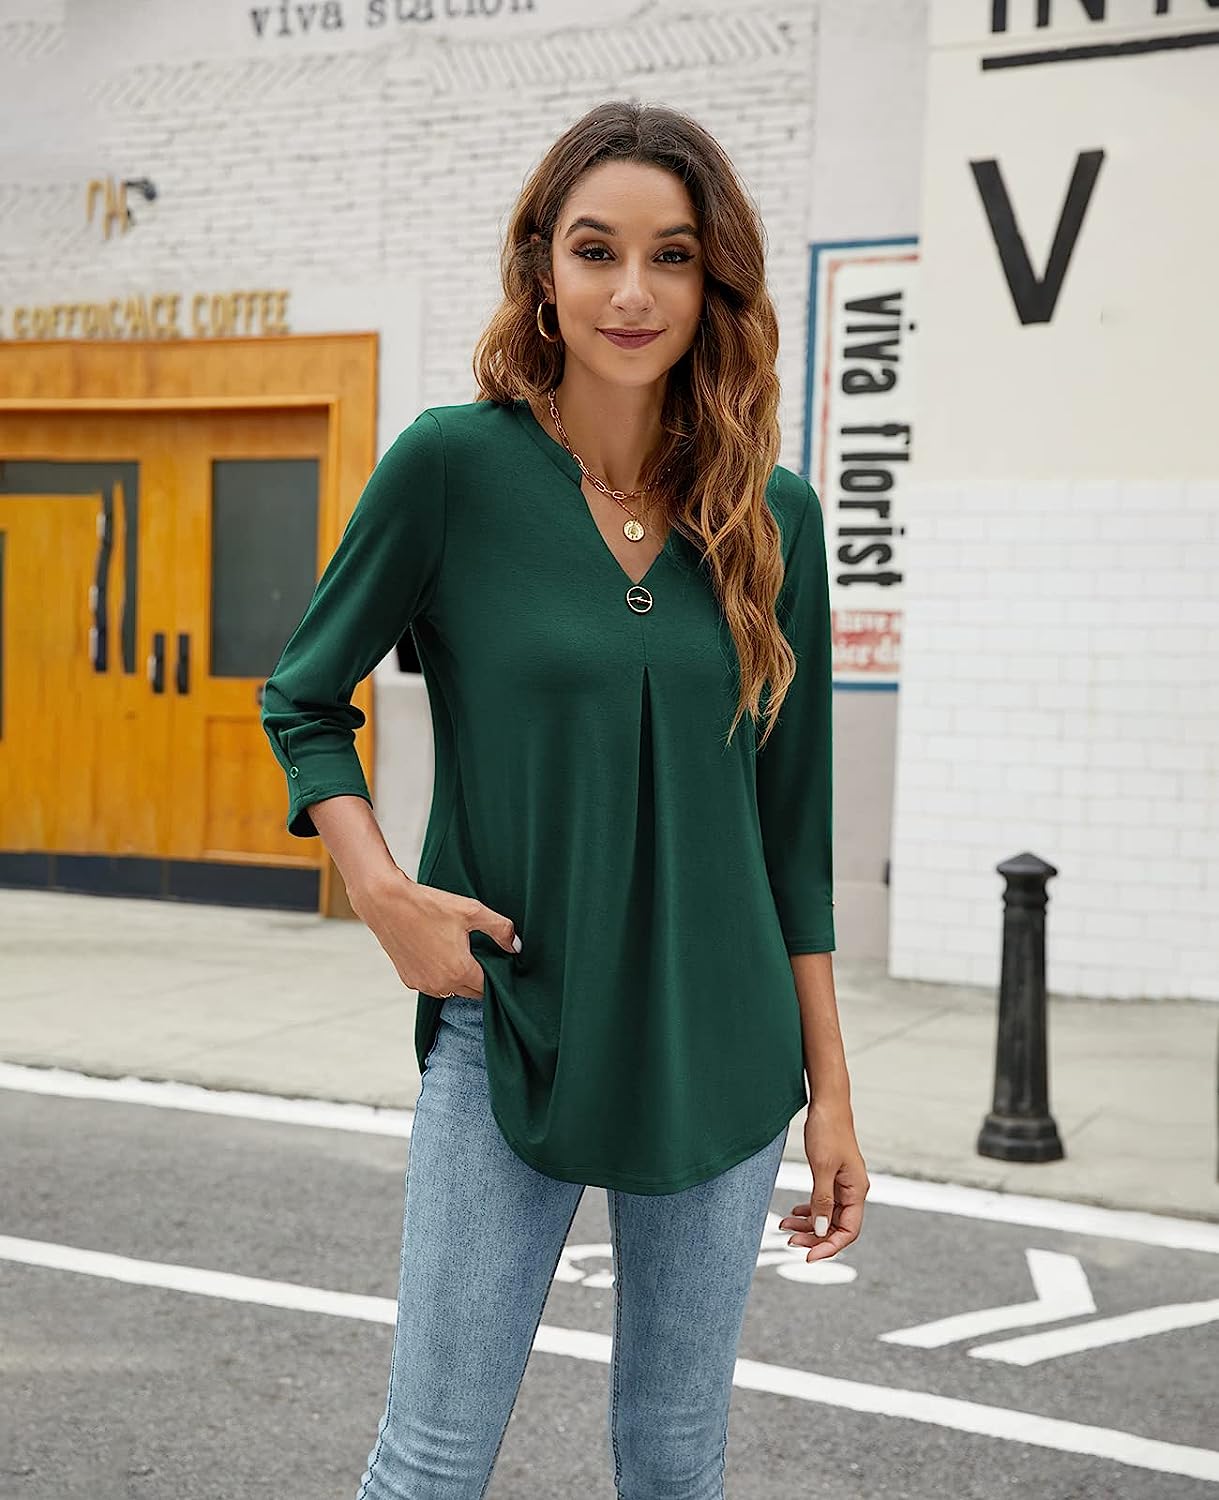 BESTSPR Womens V Neck 3/4 Sleeve Shirts Business Casual Tops Loose Work ...